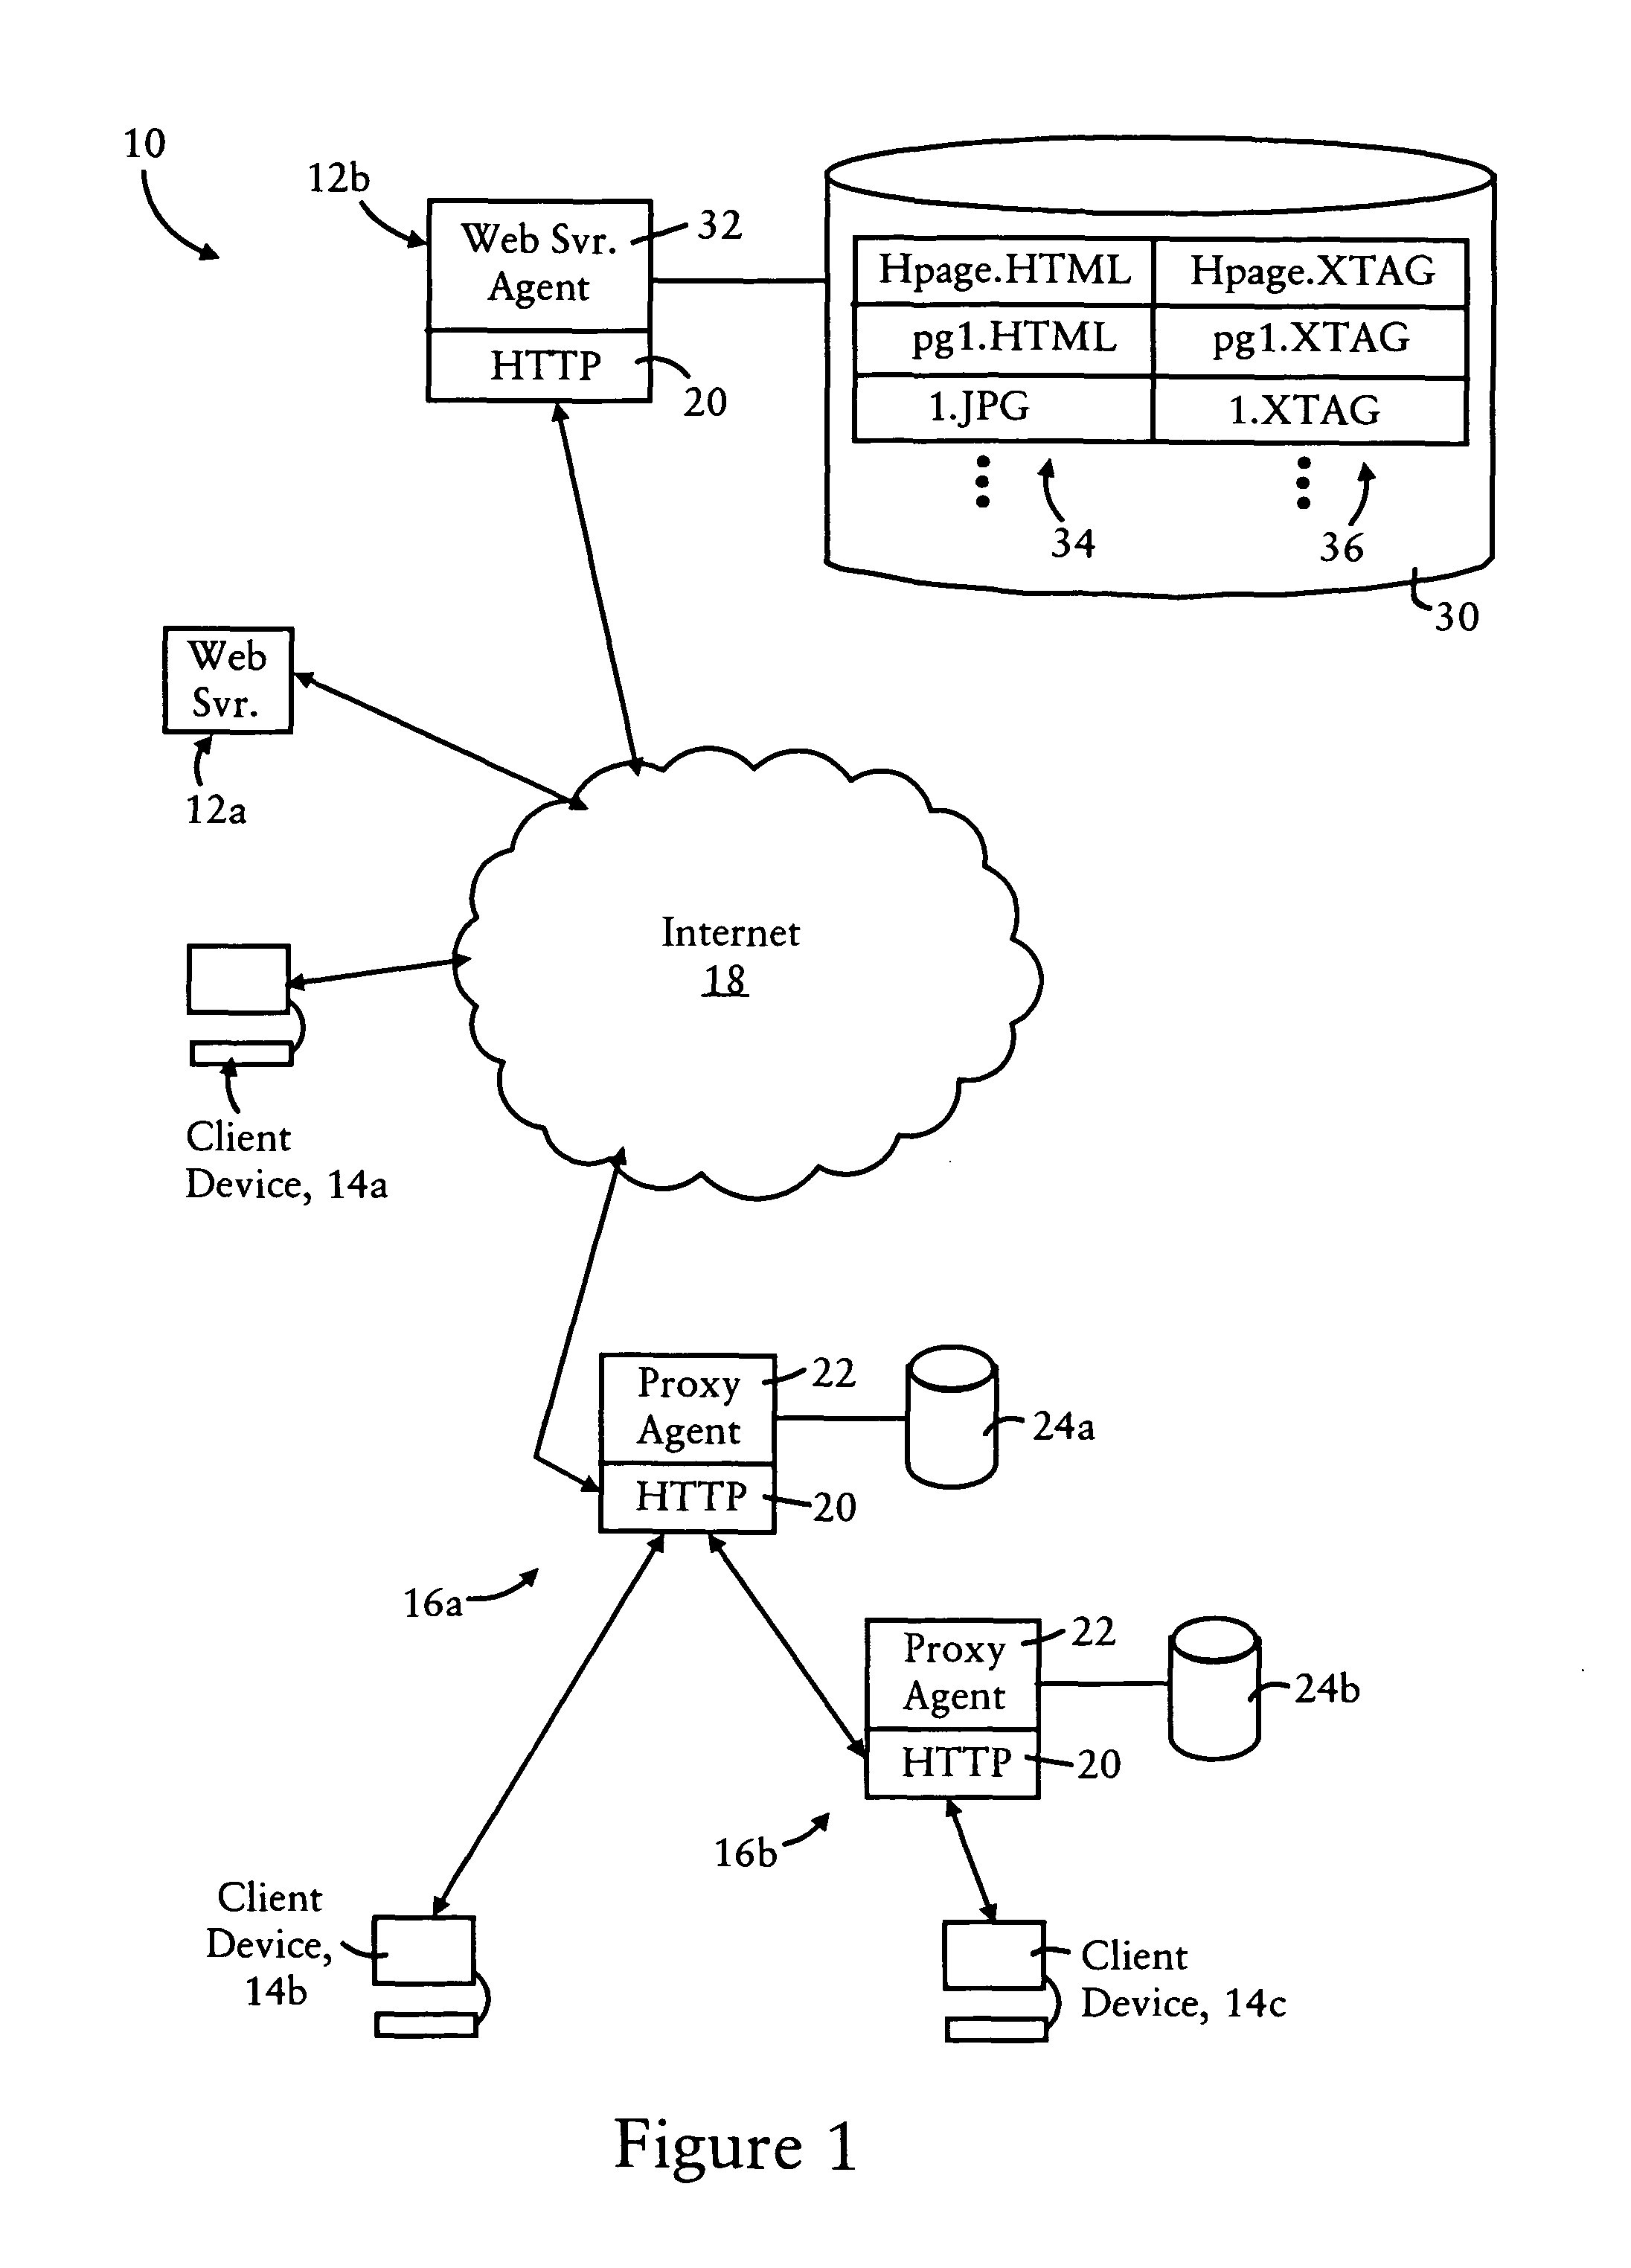 Arrangement for providing content operation identifiers with a specified HTTP object for acceleration of relevant content operations